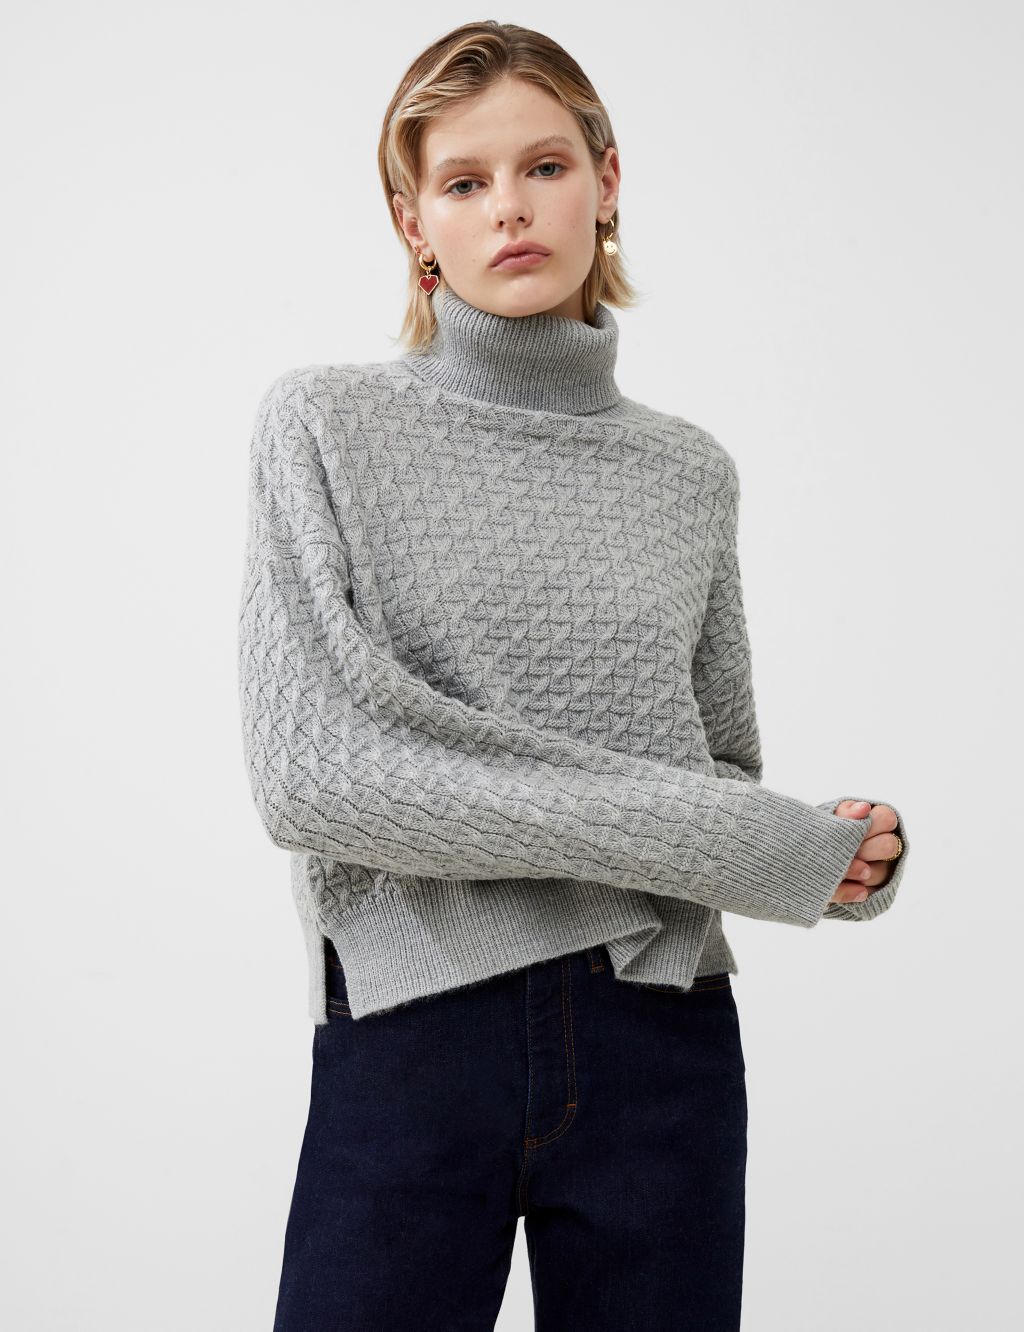 Women's Roll Neck Jumpers